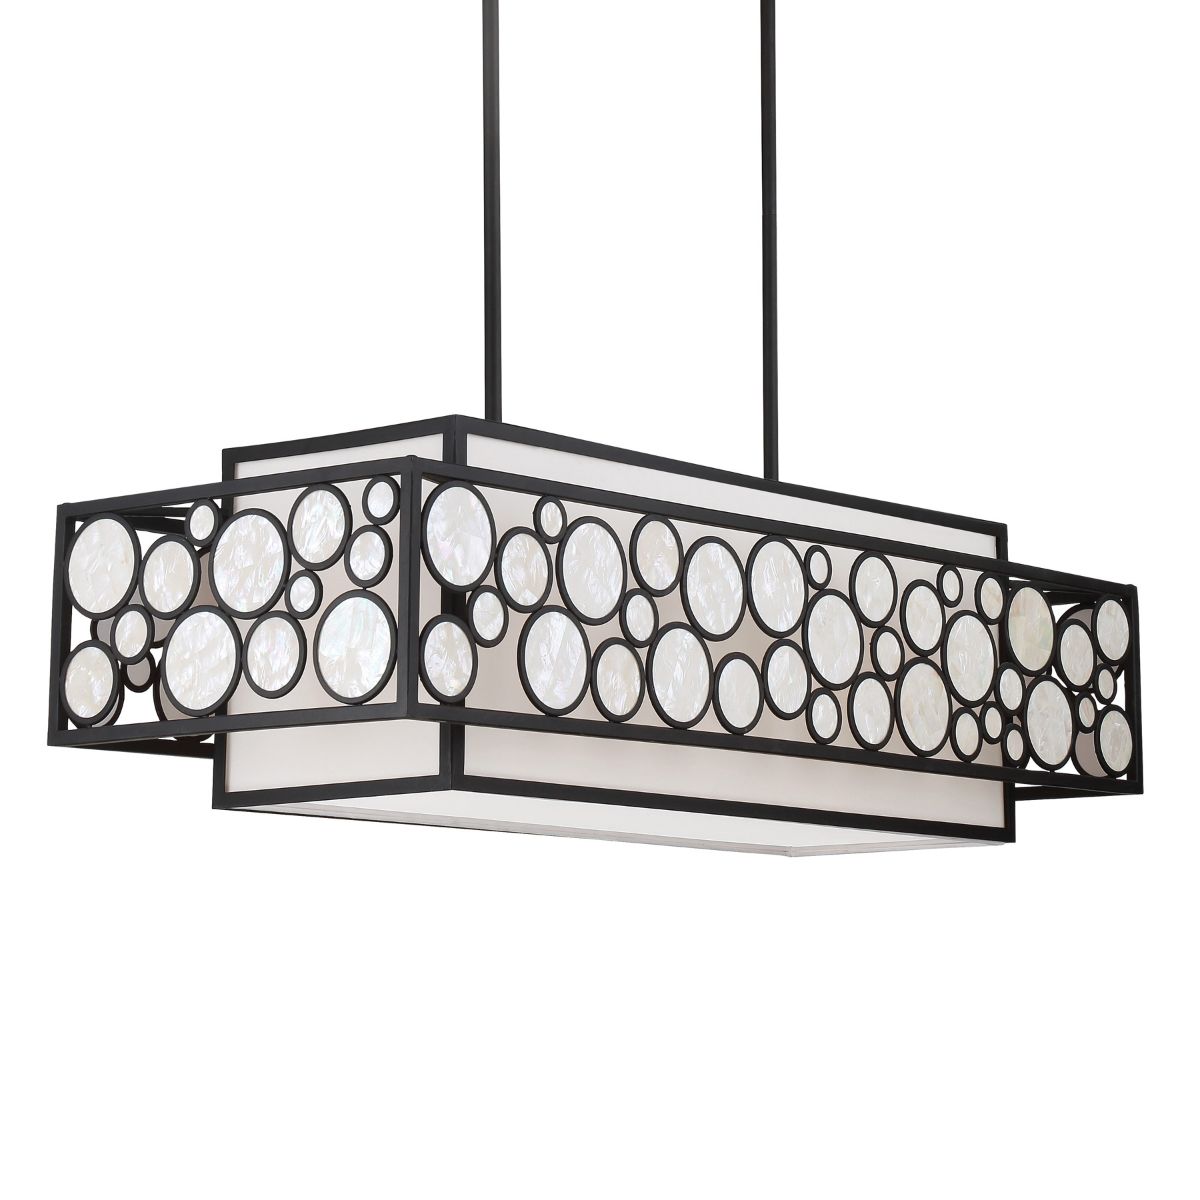 Mosaic 42 in. 4 lights Pendant Light Oil Rubbed Bronze Finish